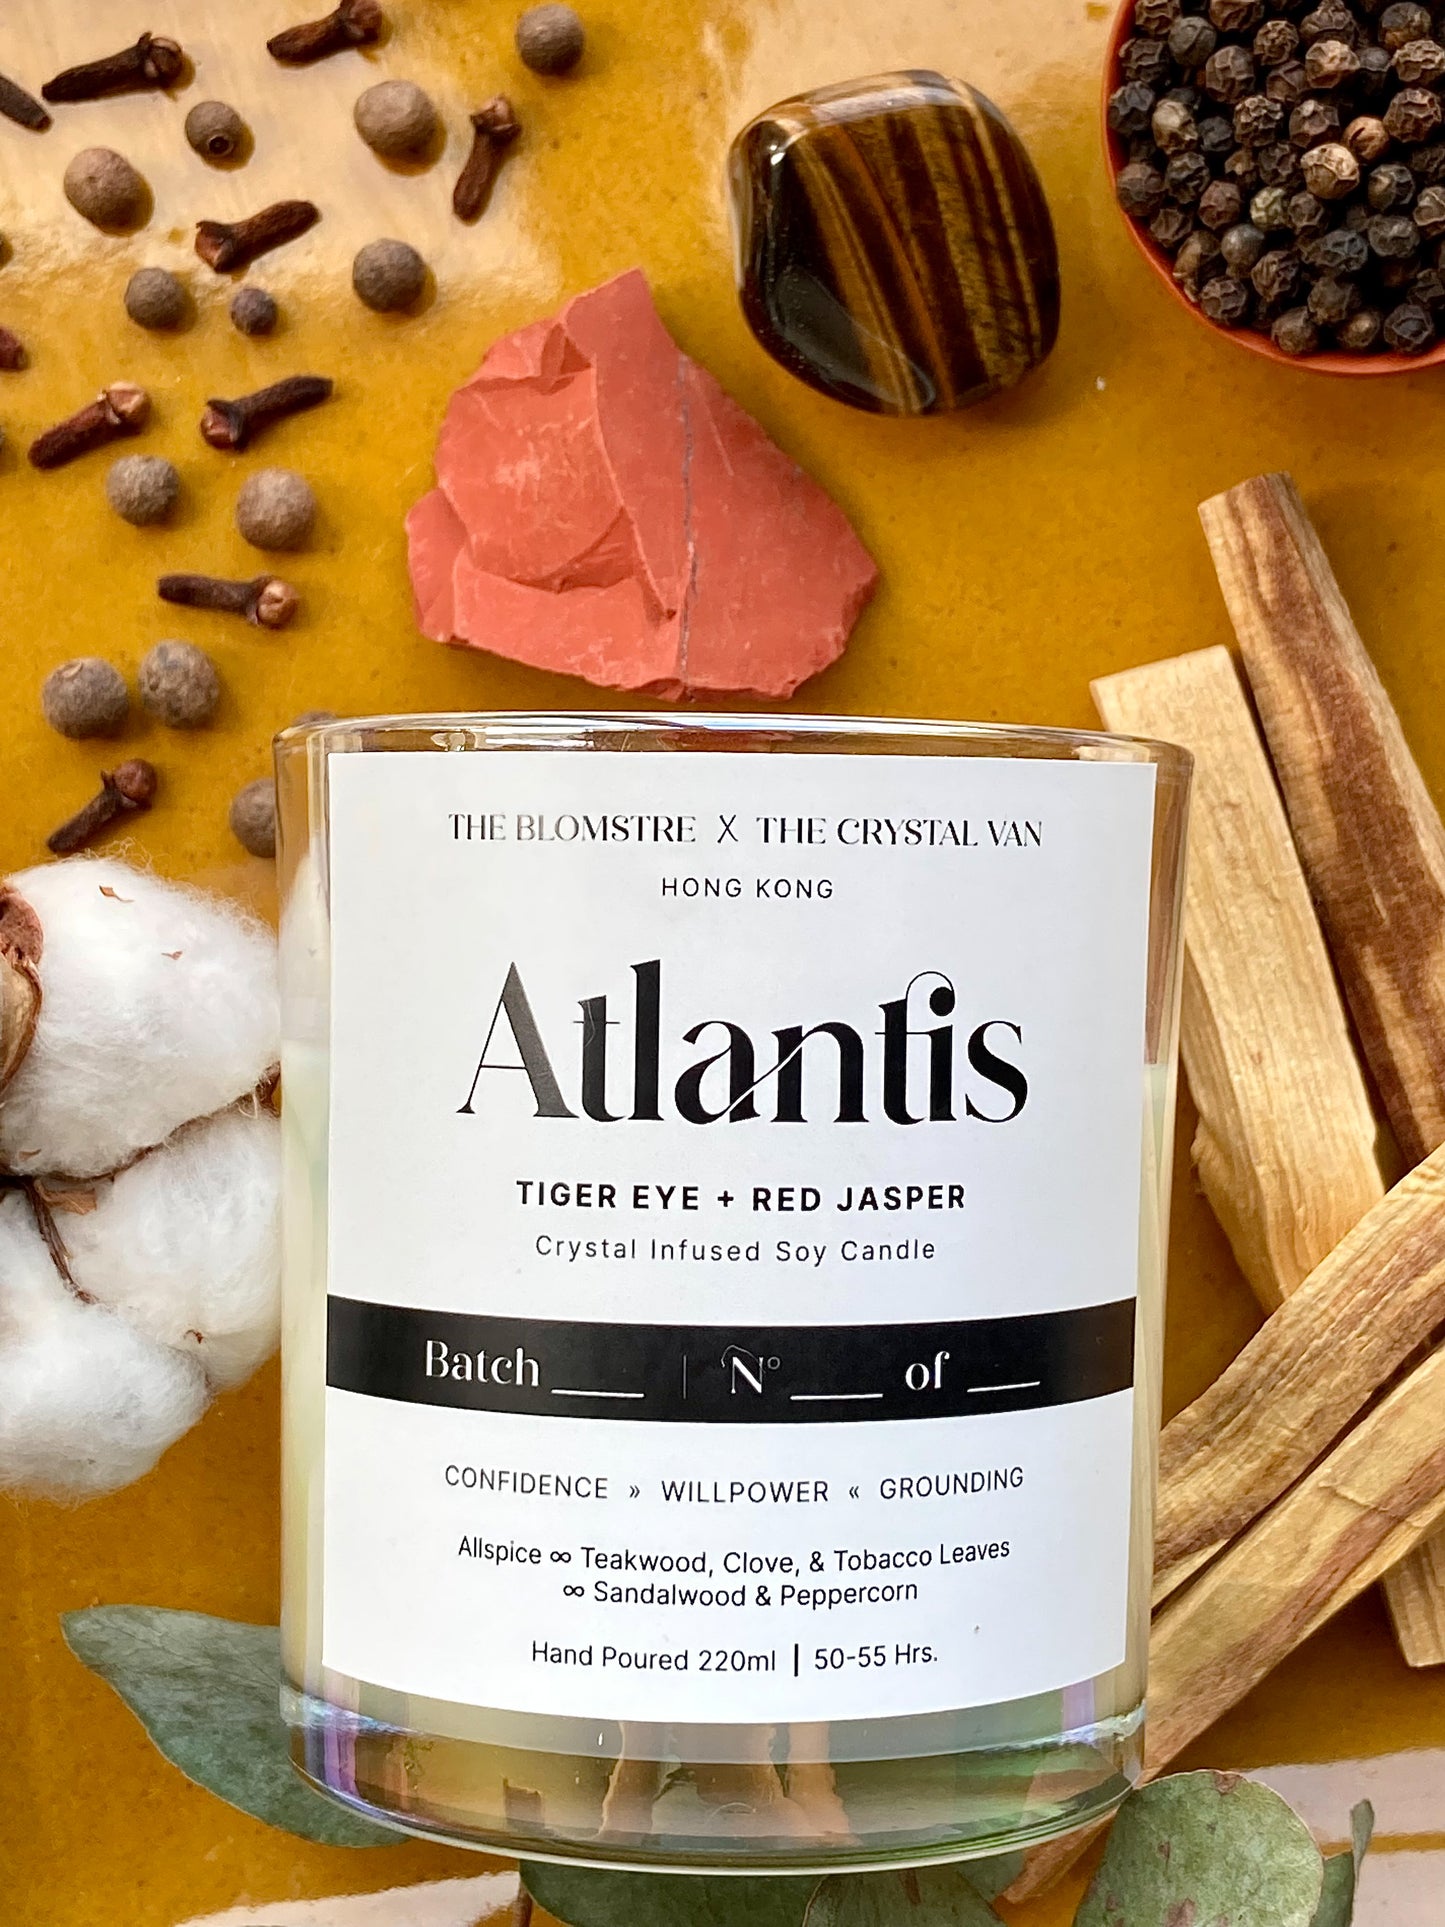 Crystal Infused Soy Candle 220ml: ATLANTIS [THE BLOMSTRE x THE CRYSTAL VAN]